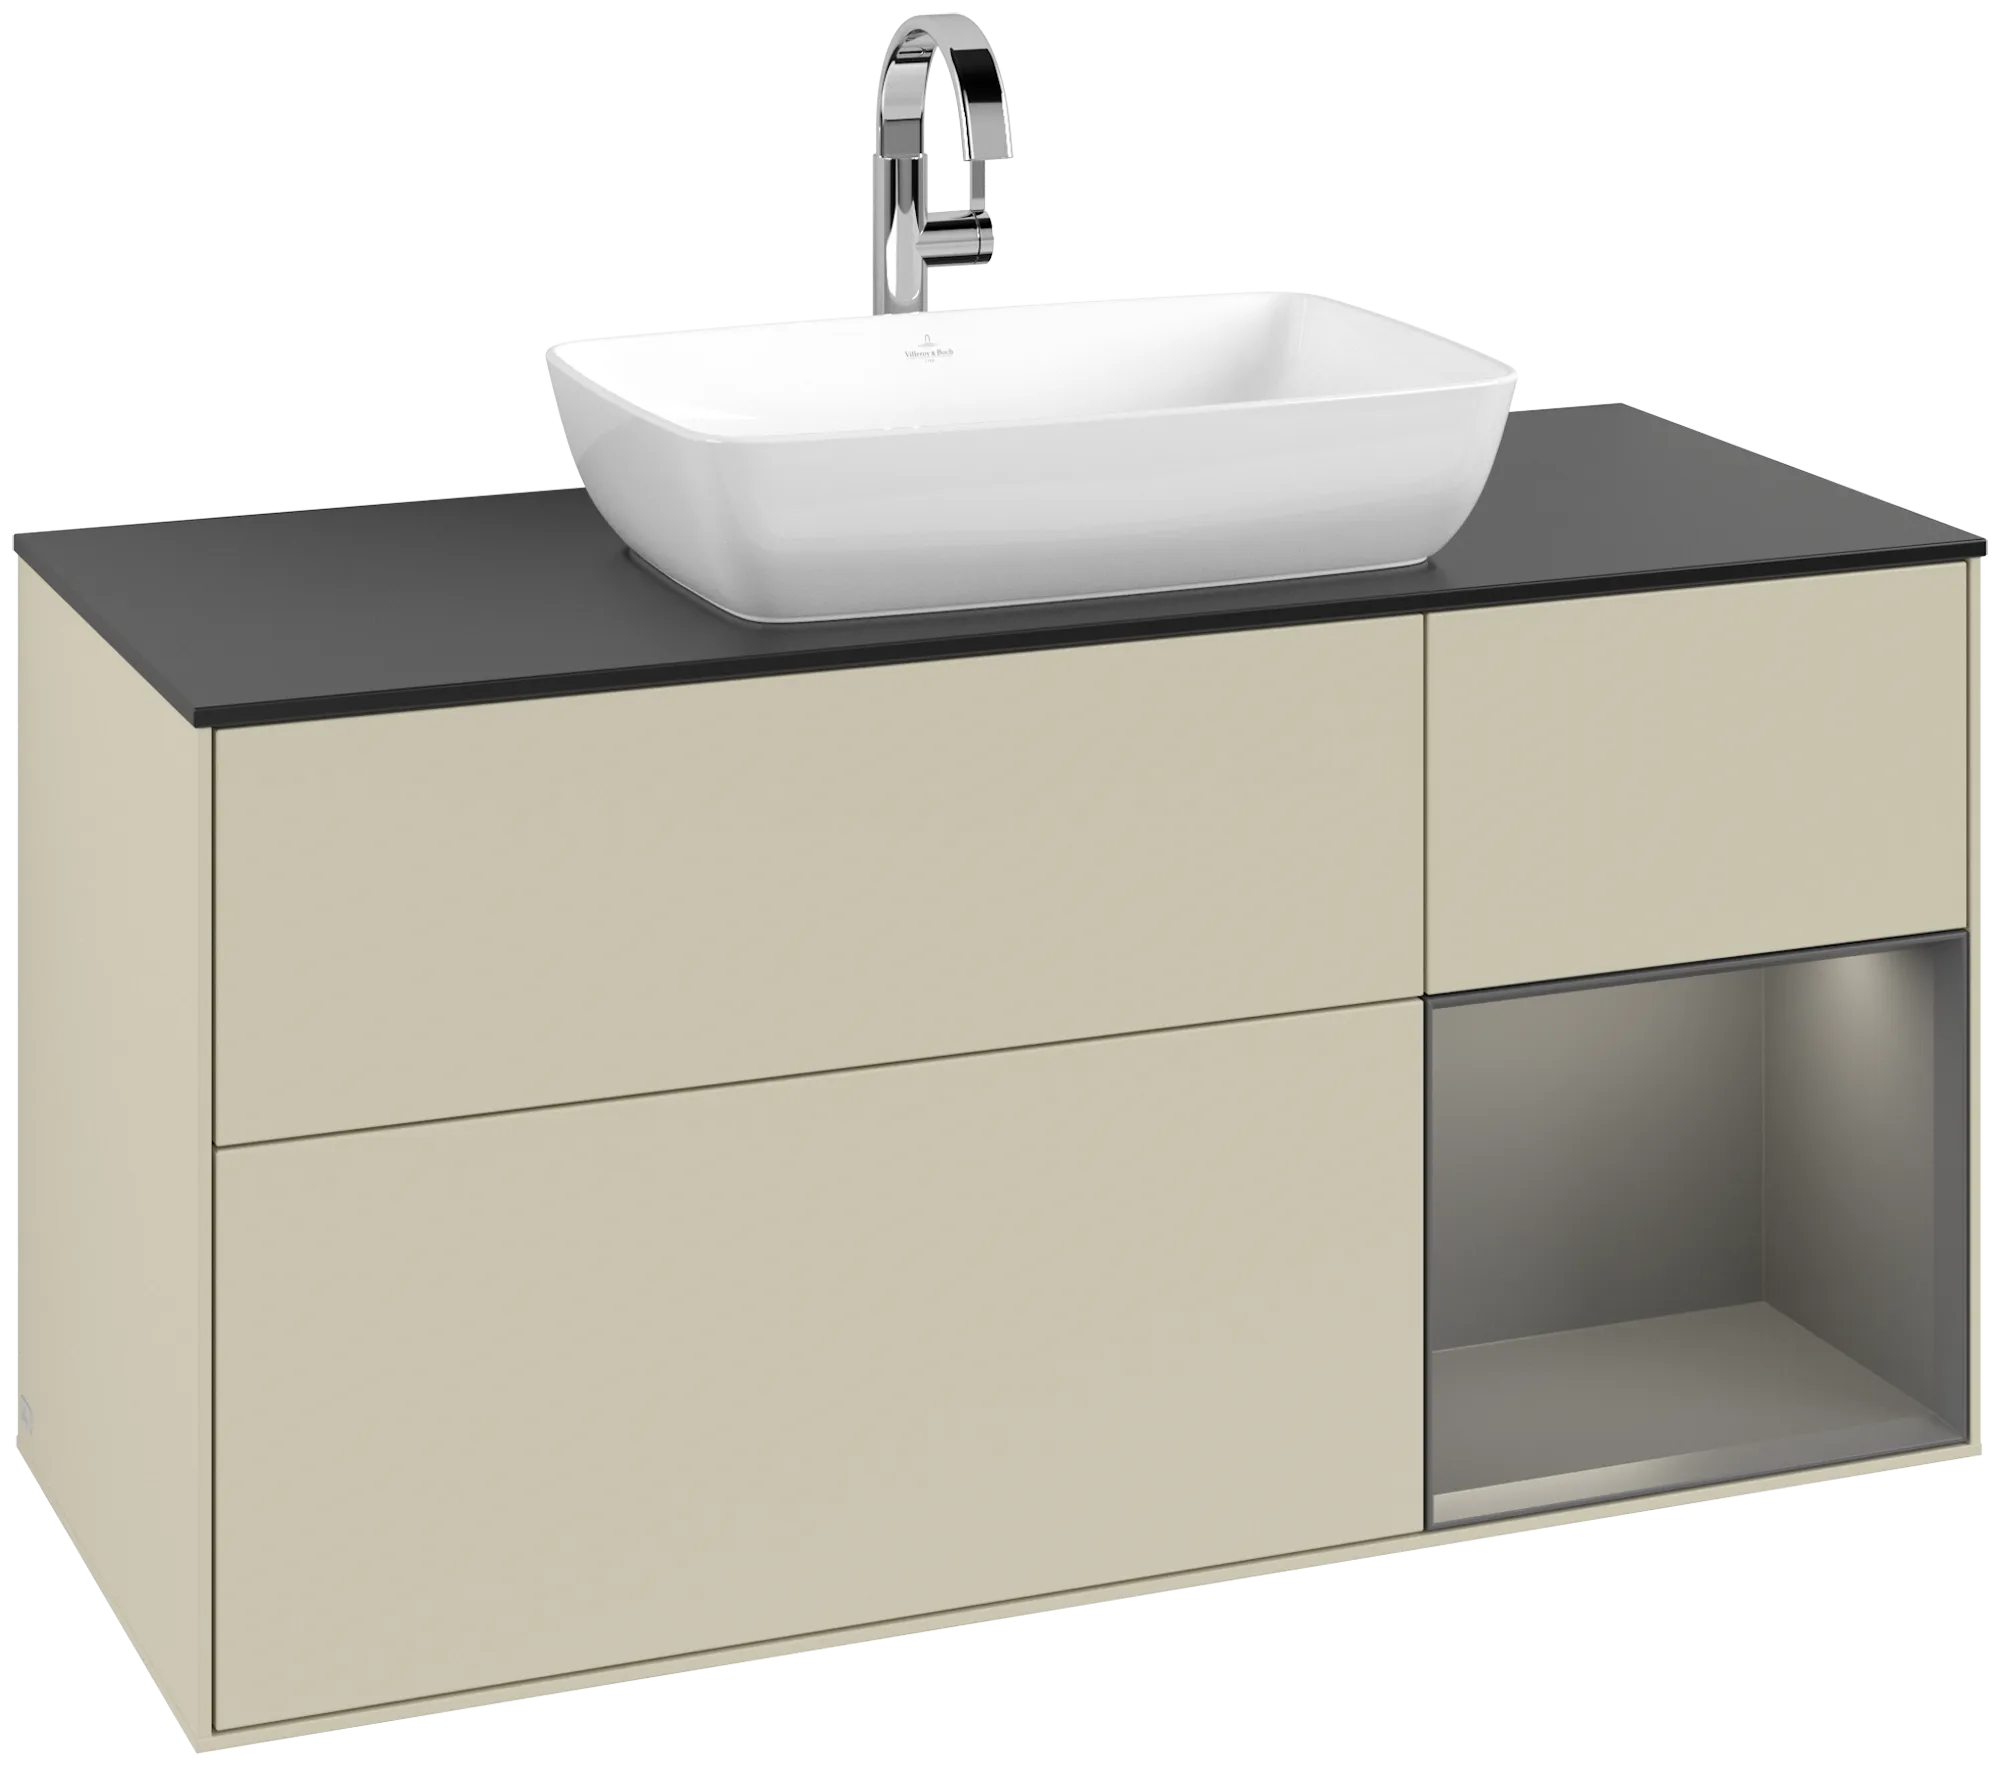 Picture of VILLEROY BOCH Finion Vanity unit, with lighting, 3 pull-out compartments, 1200 x 603 x 501 mm, Silk Grey Matt Lacquer / Anthracite Matt Lacquer / Glass Black Matt #G832GKHJ